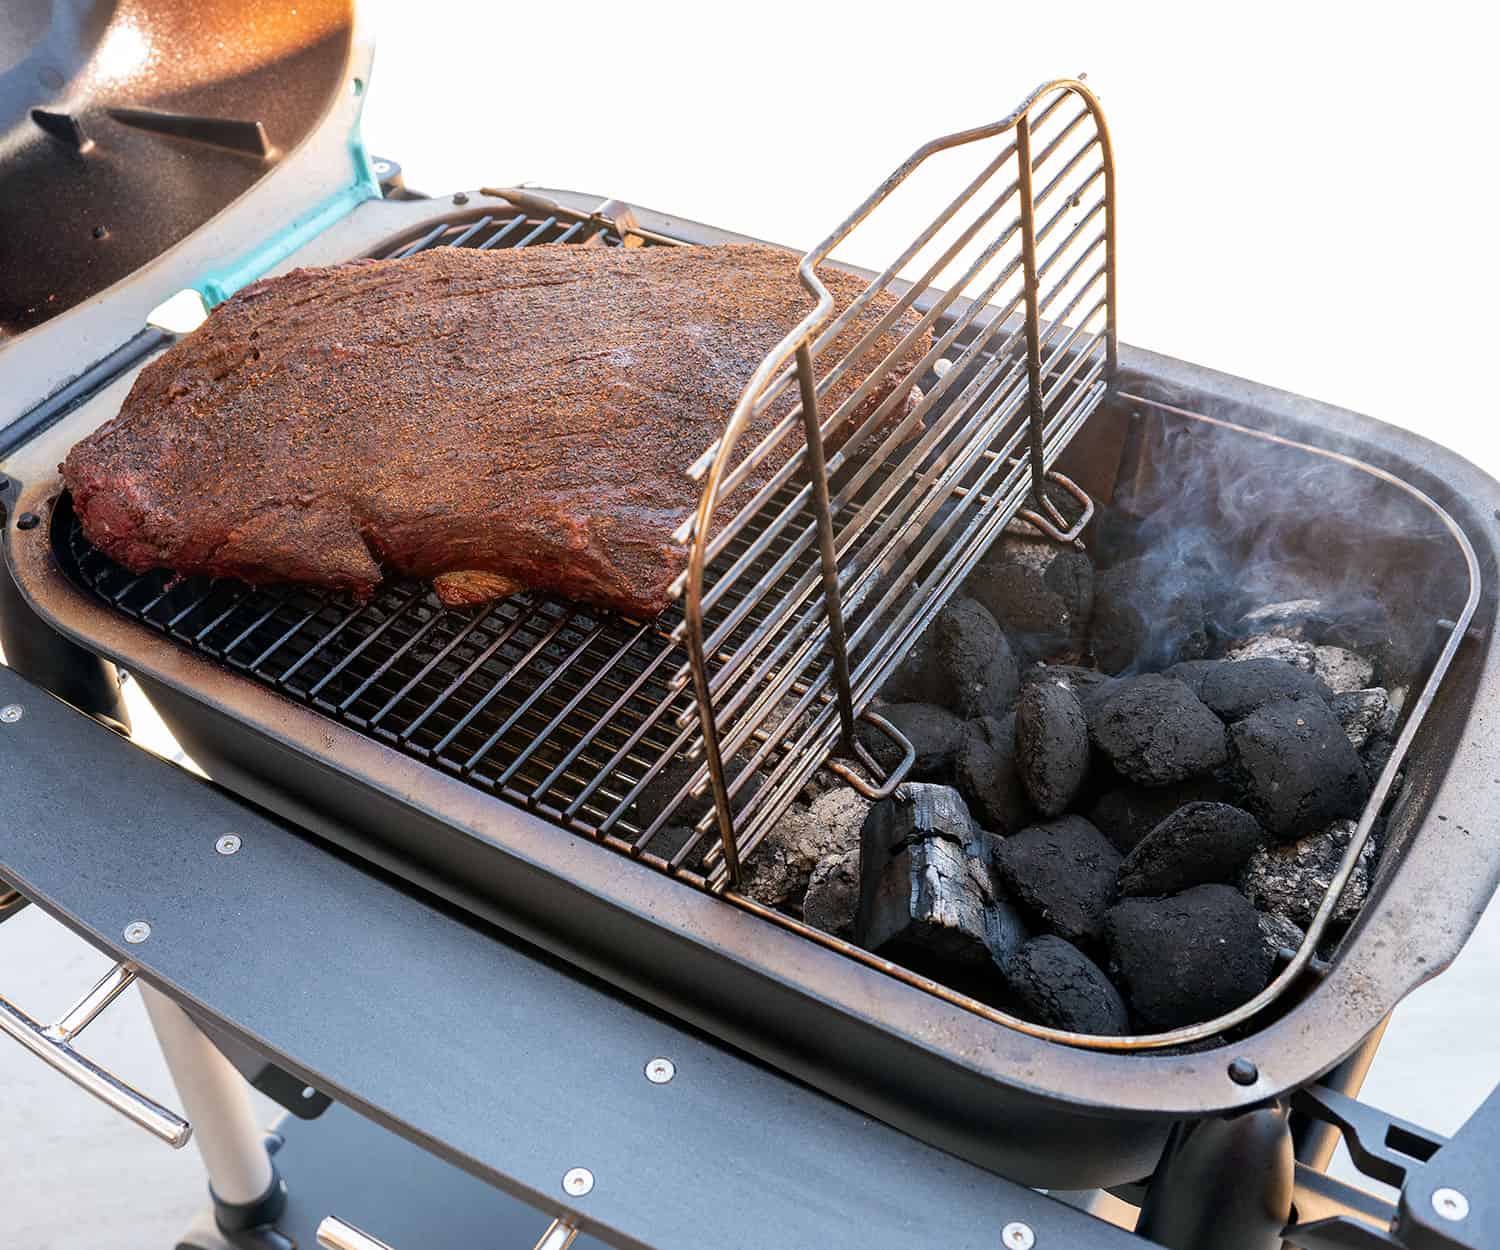 brisket smoking on PK Grill with hinge grate open